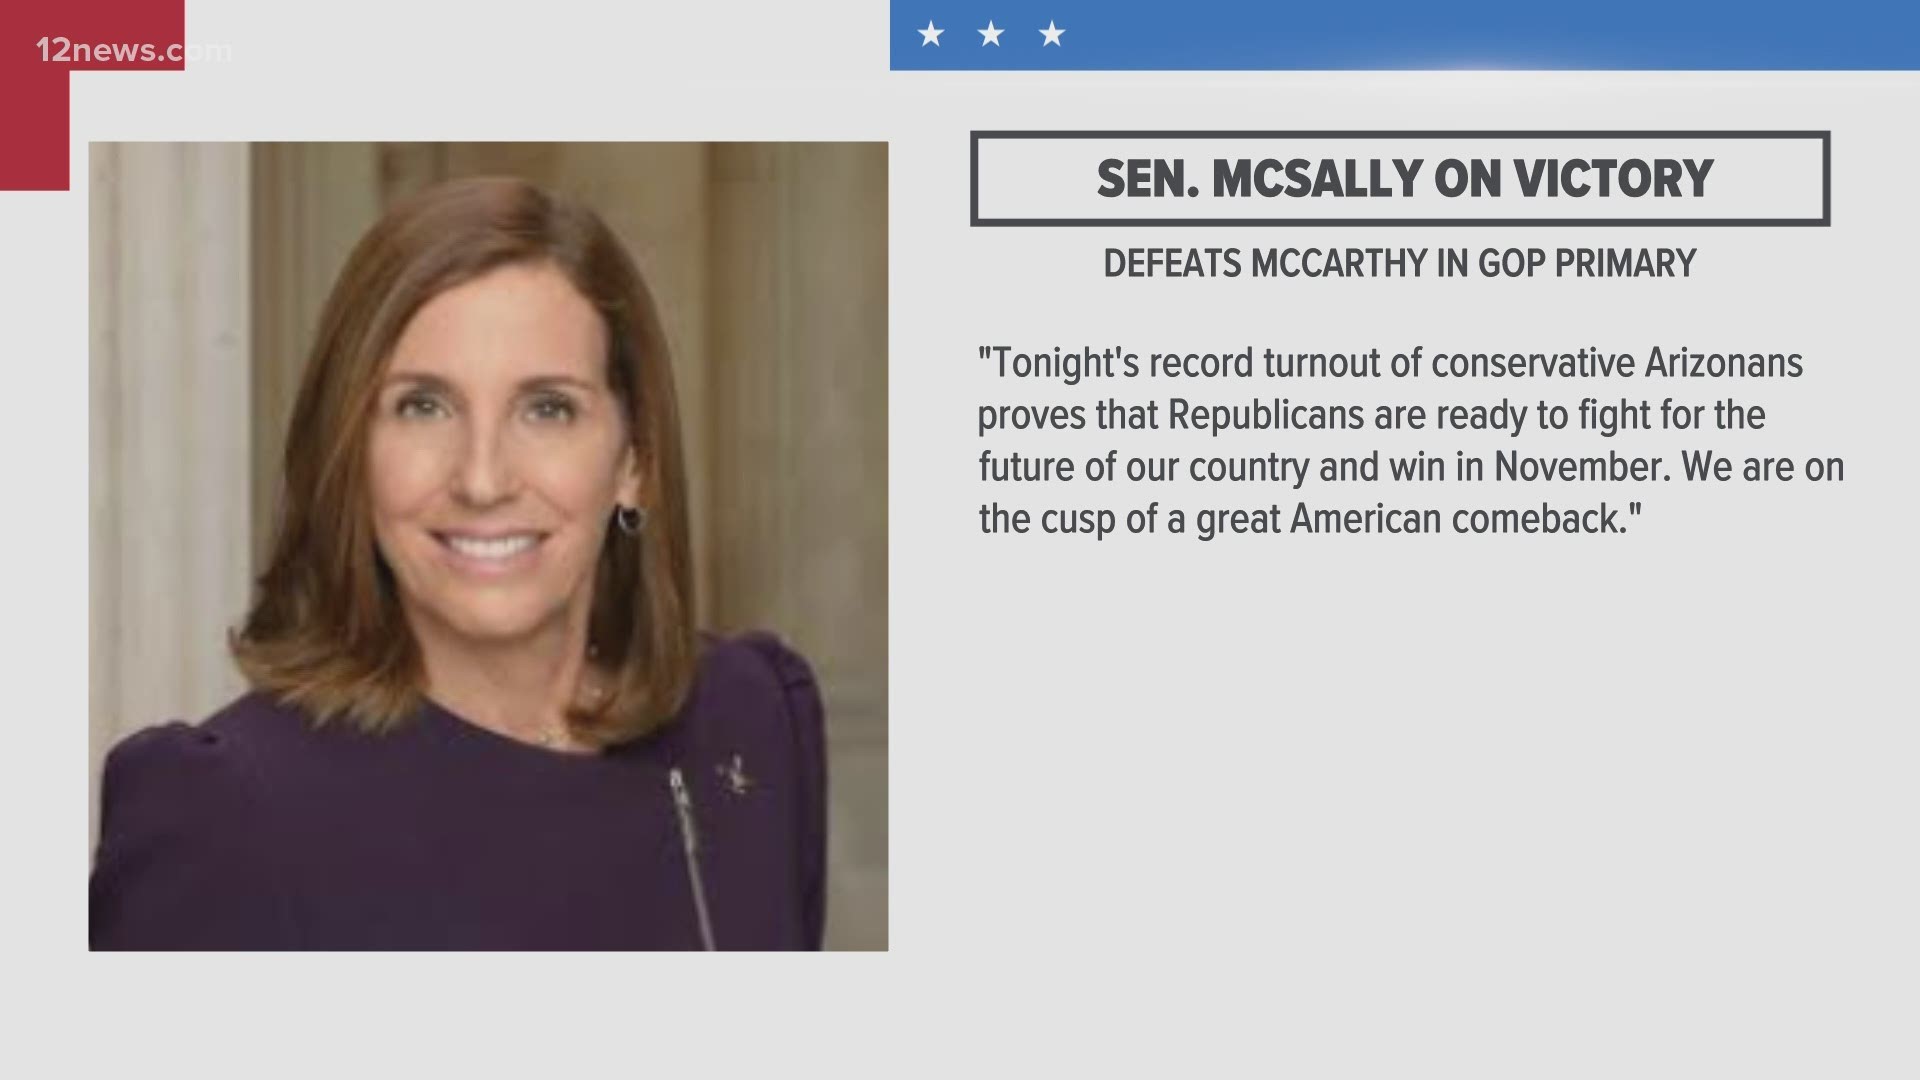 The win means Sen. McSally will take on Democrat Mark Kelly in the November Senate special election in Arizona.